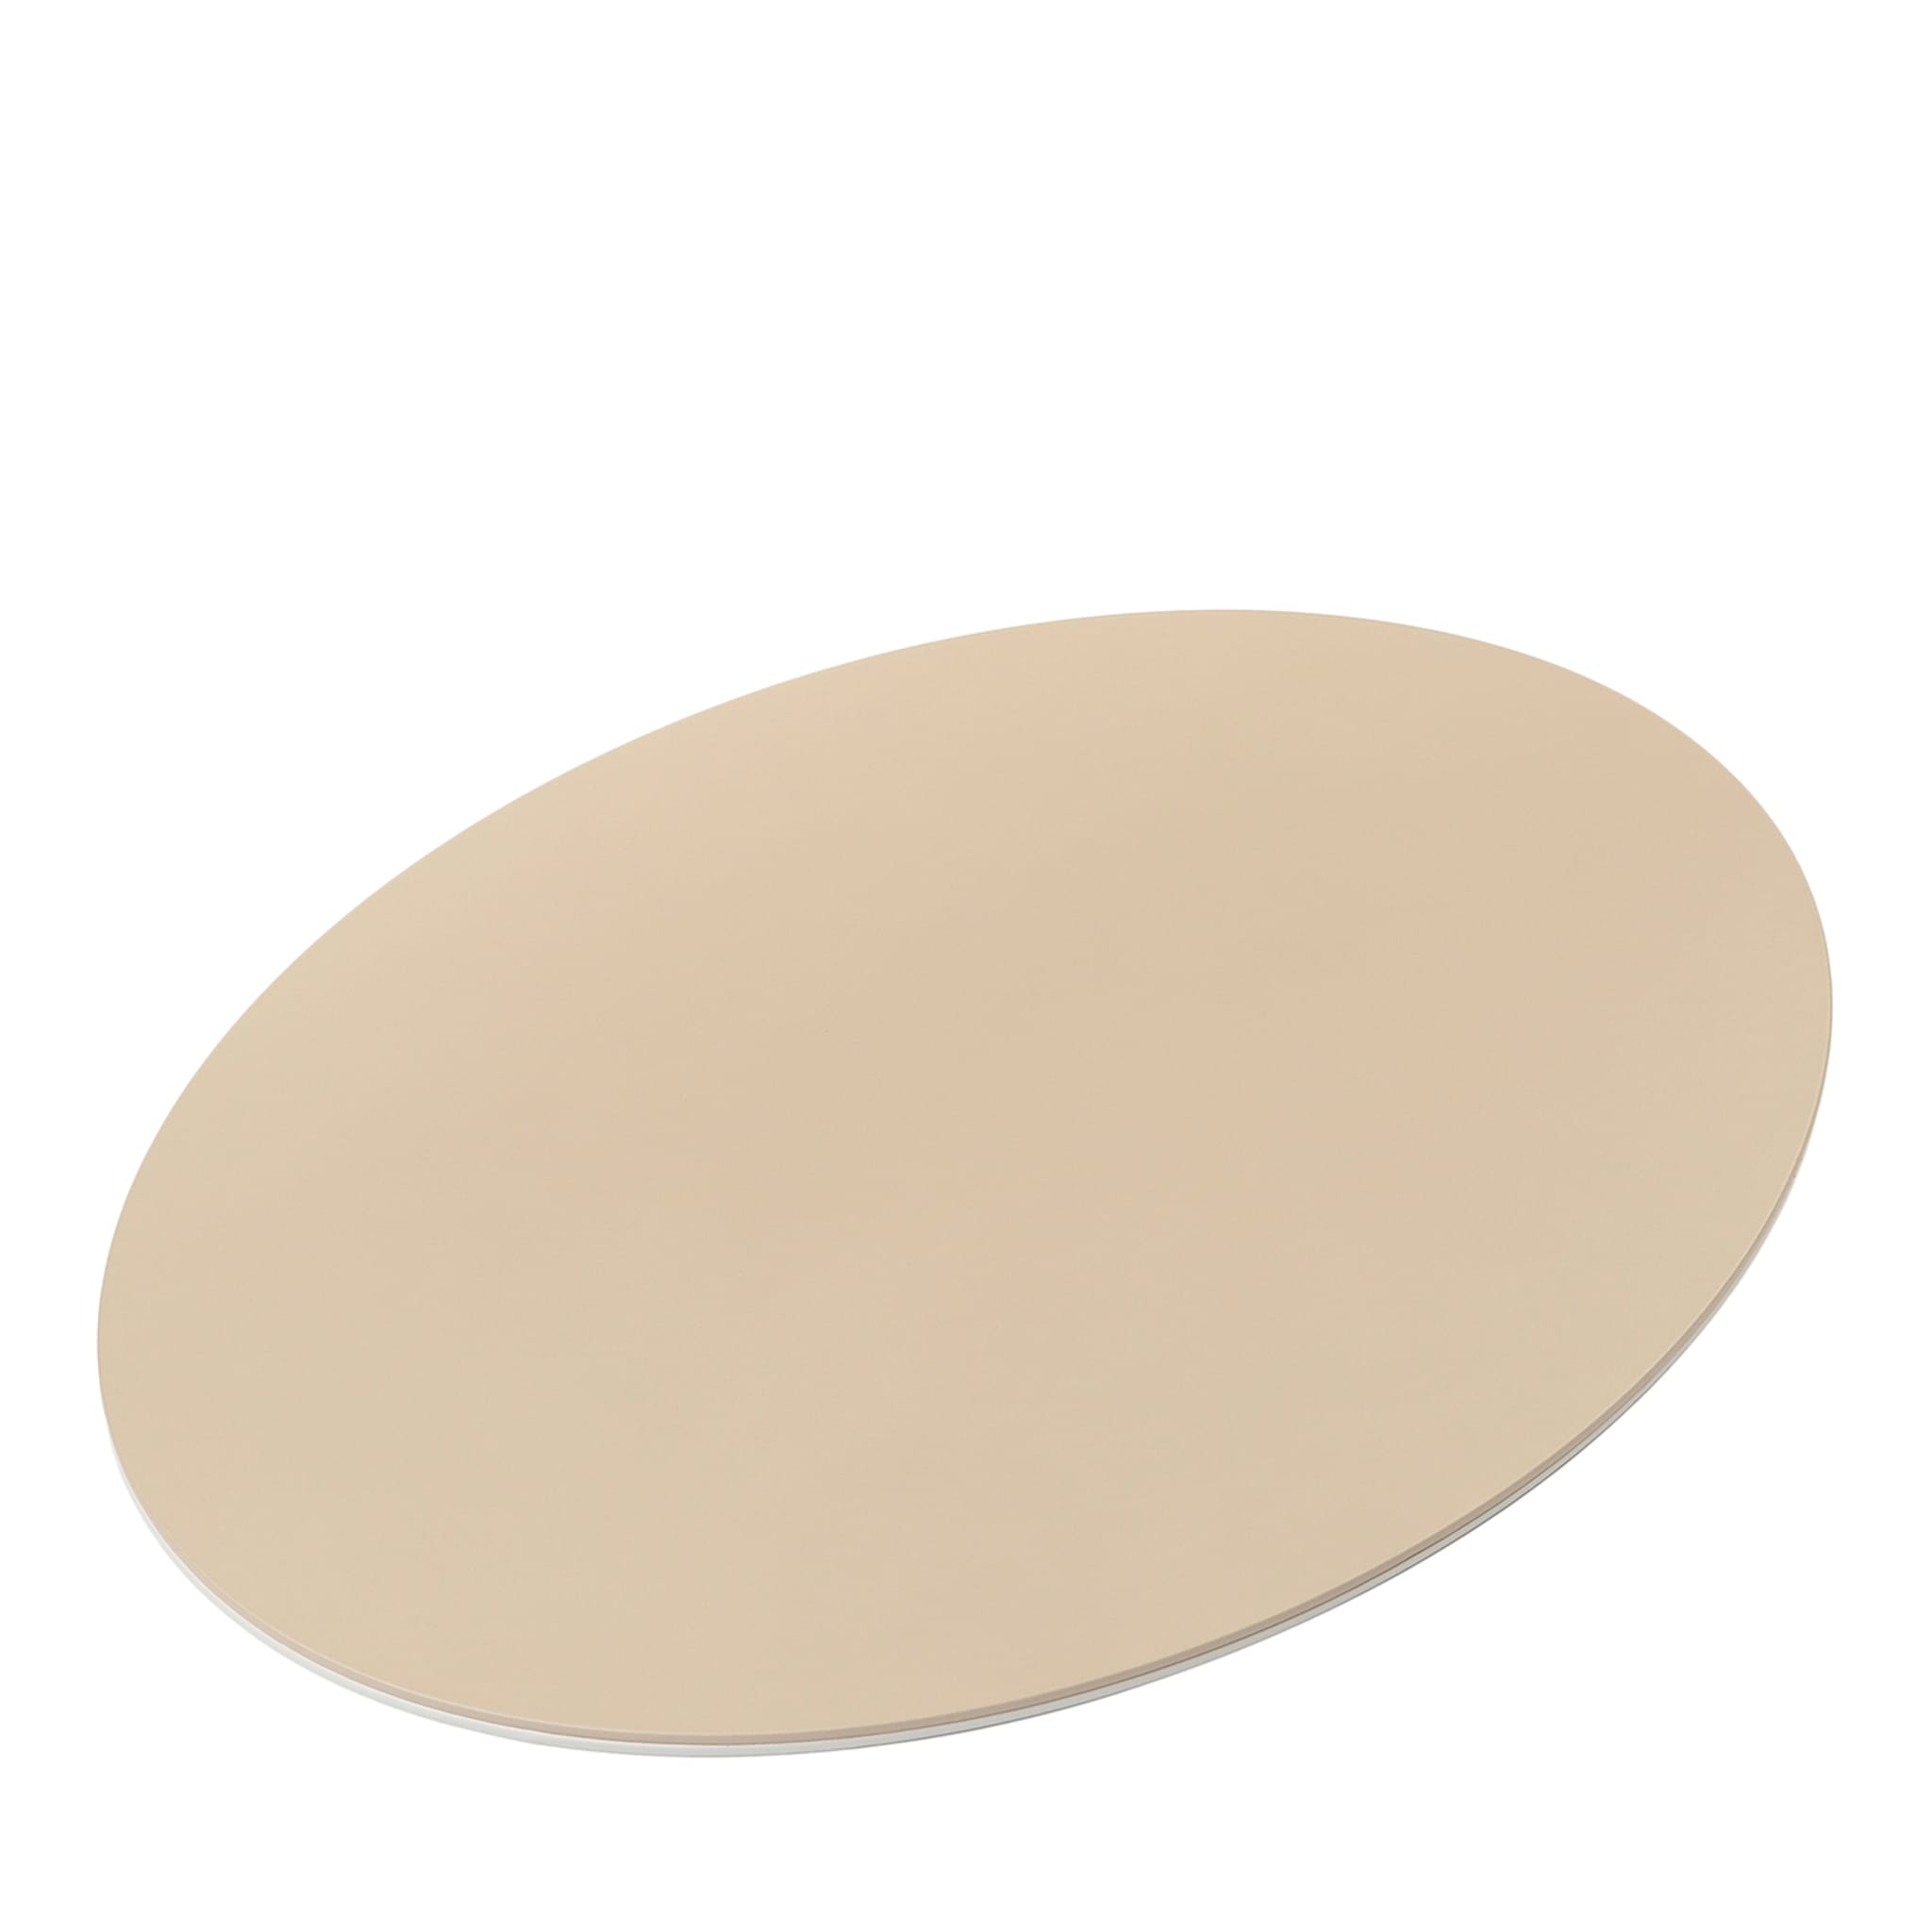 Mondrian Capuccino Beige and Luna White Oval Placemat - Main view